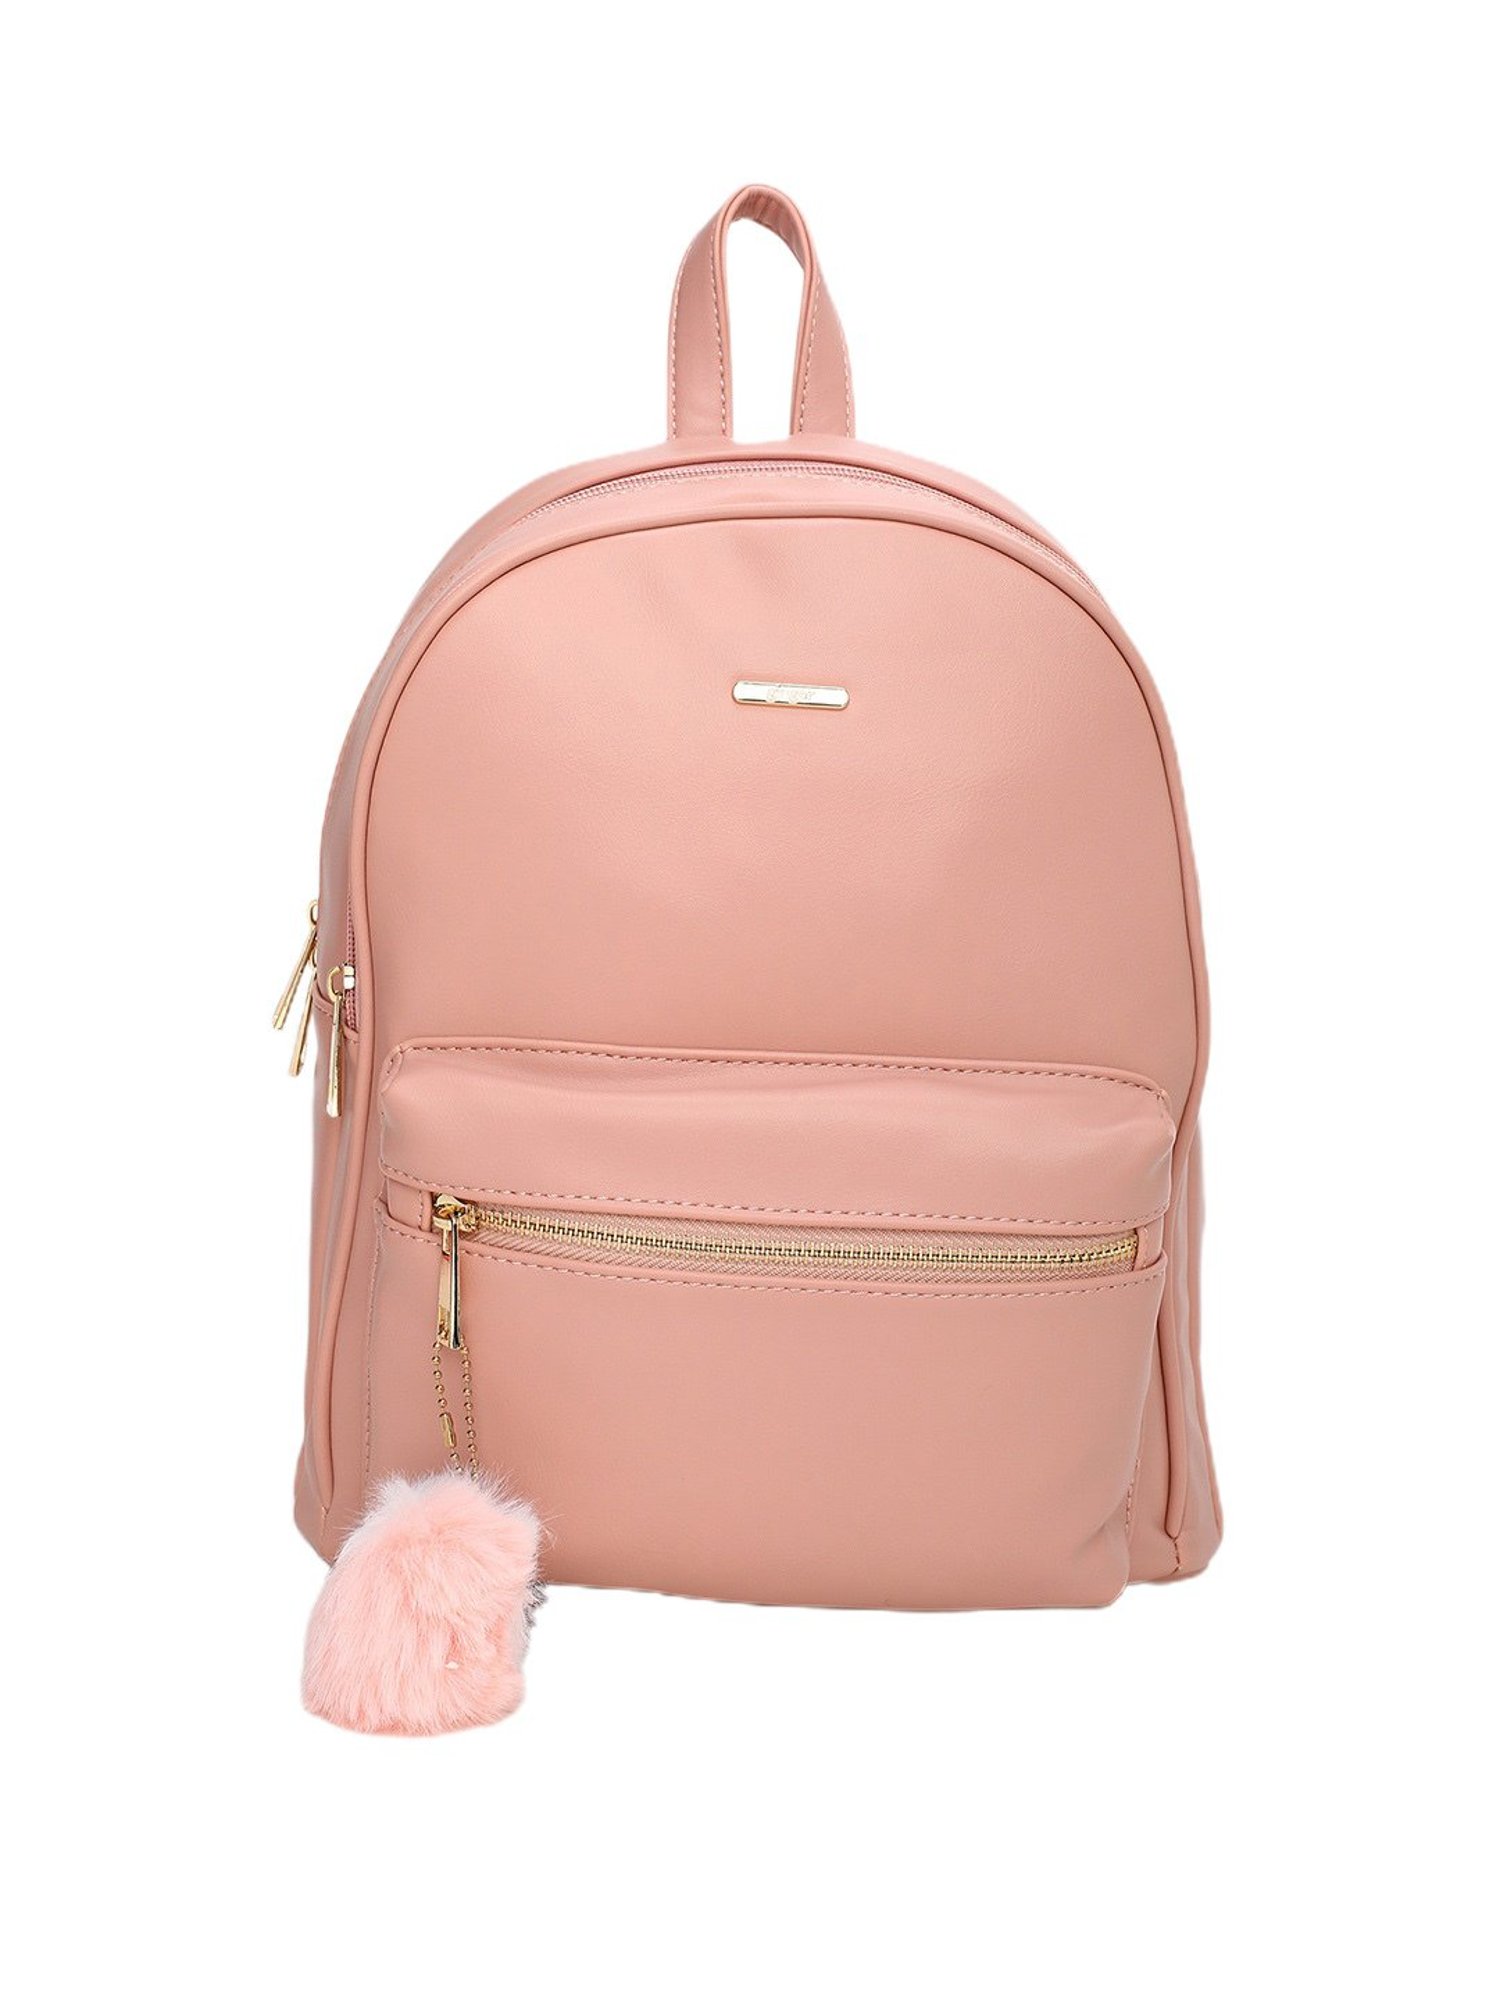 JUICY COUTURE Pink /Black Patent Backpack BUCKET BAG